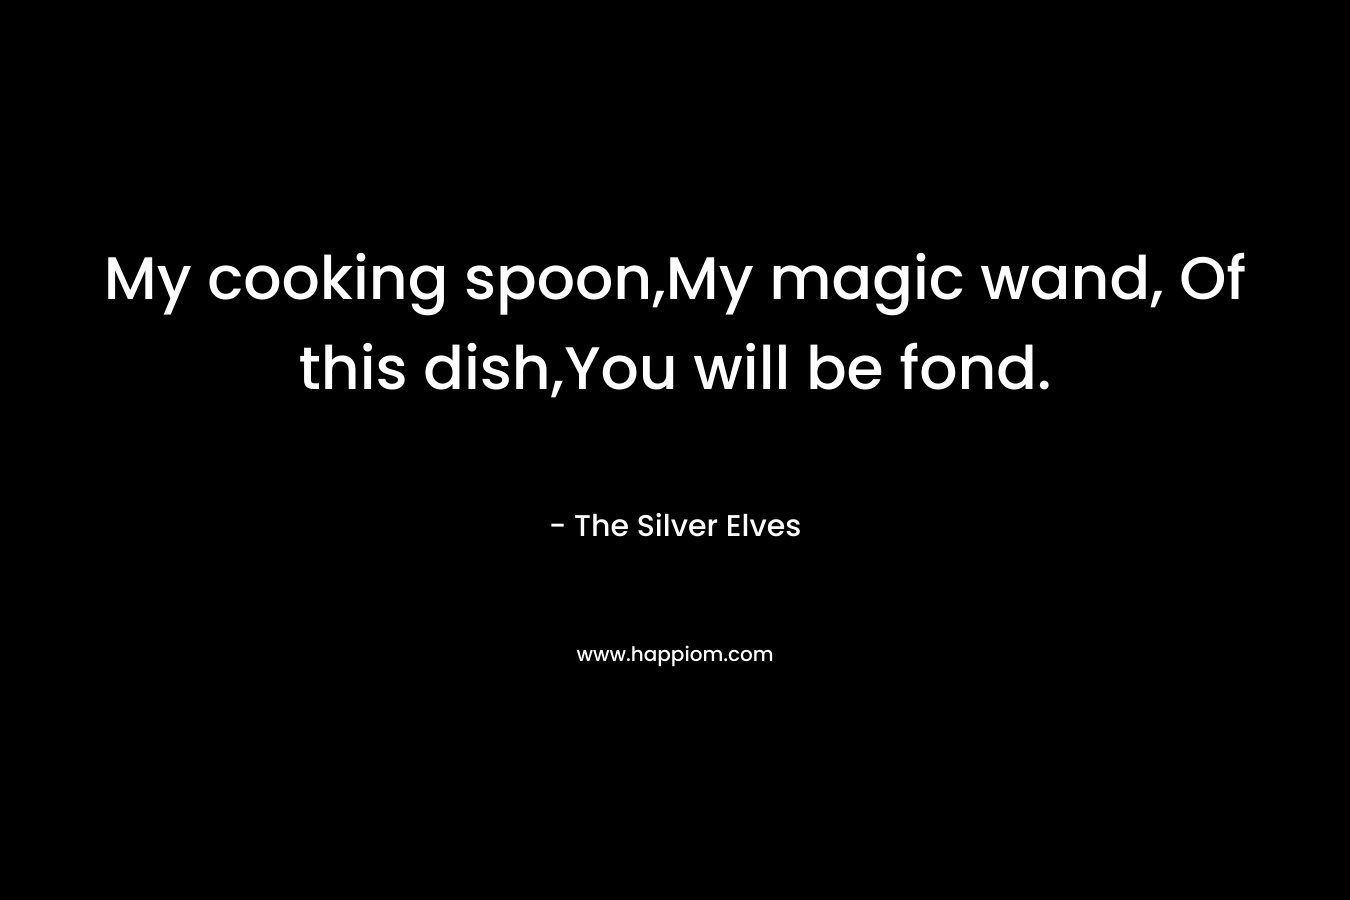 My cooking spoon,My magic wand, Of this dish,You will be fond. – The Silver Elves